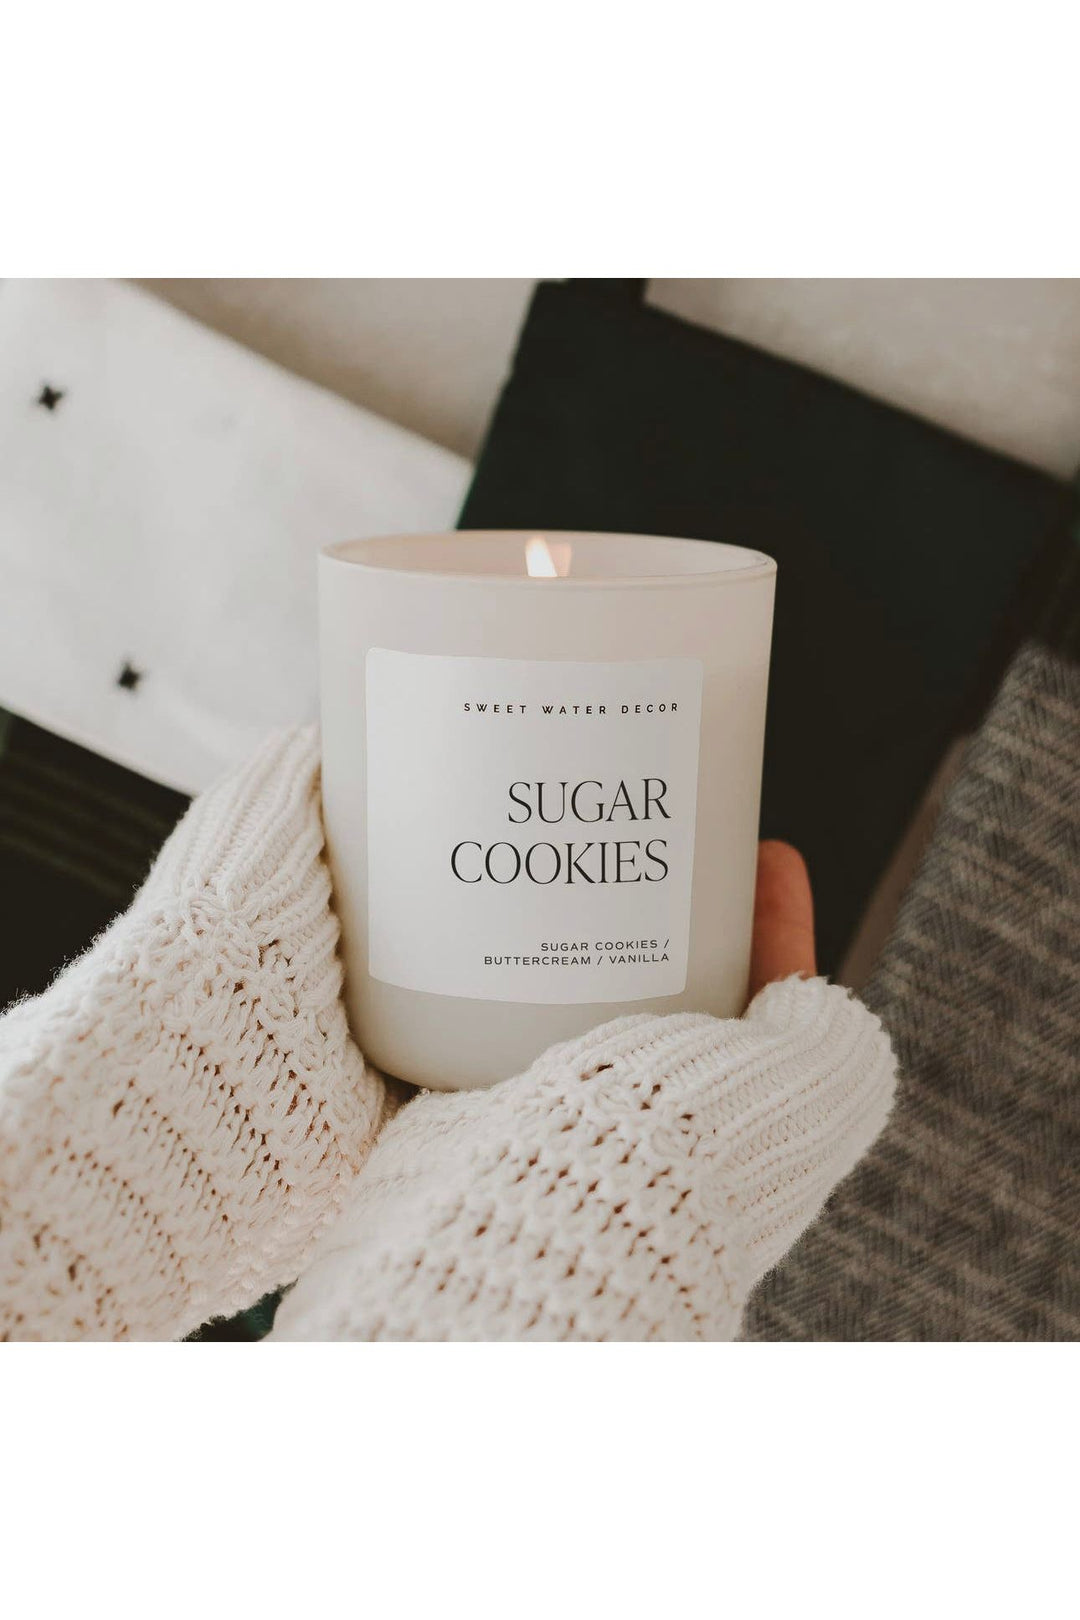 SUGAR COOKIE CANDLE